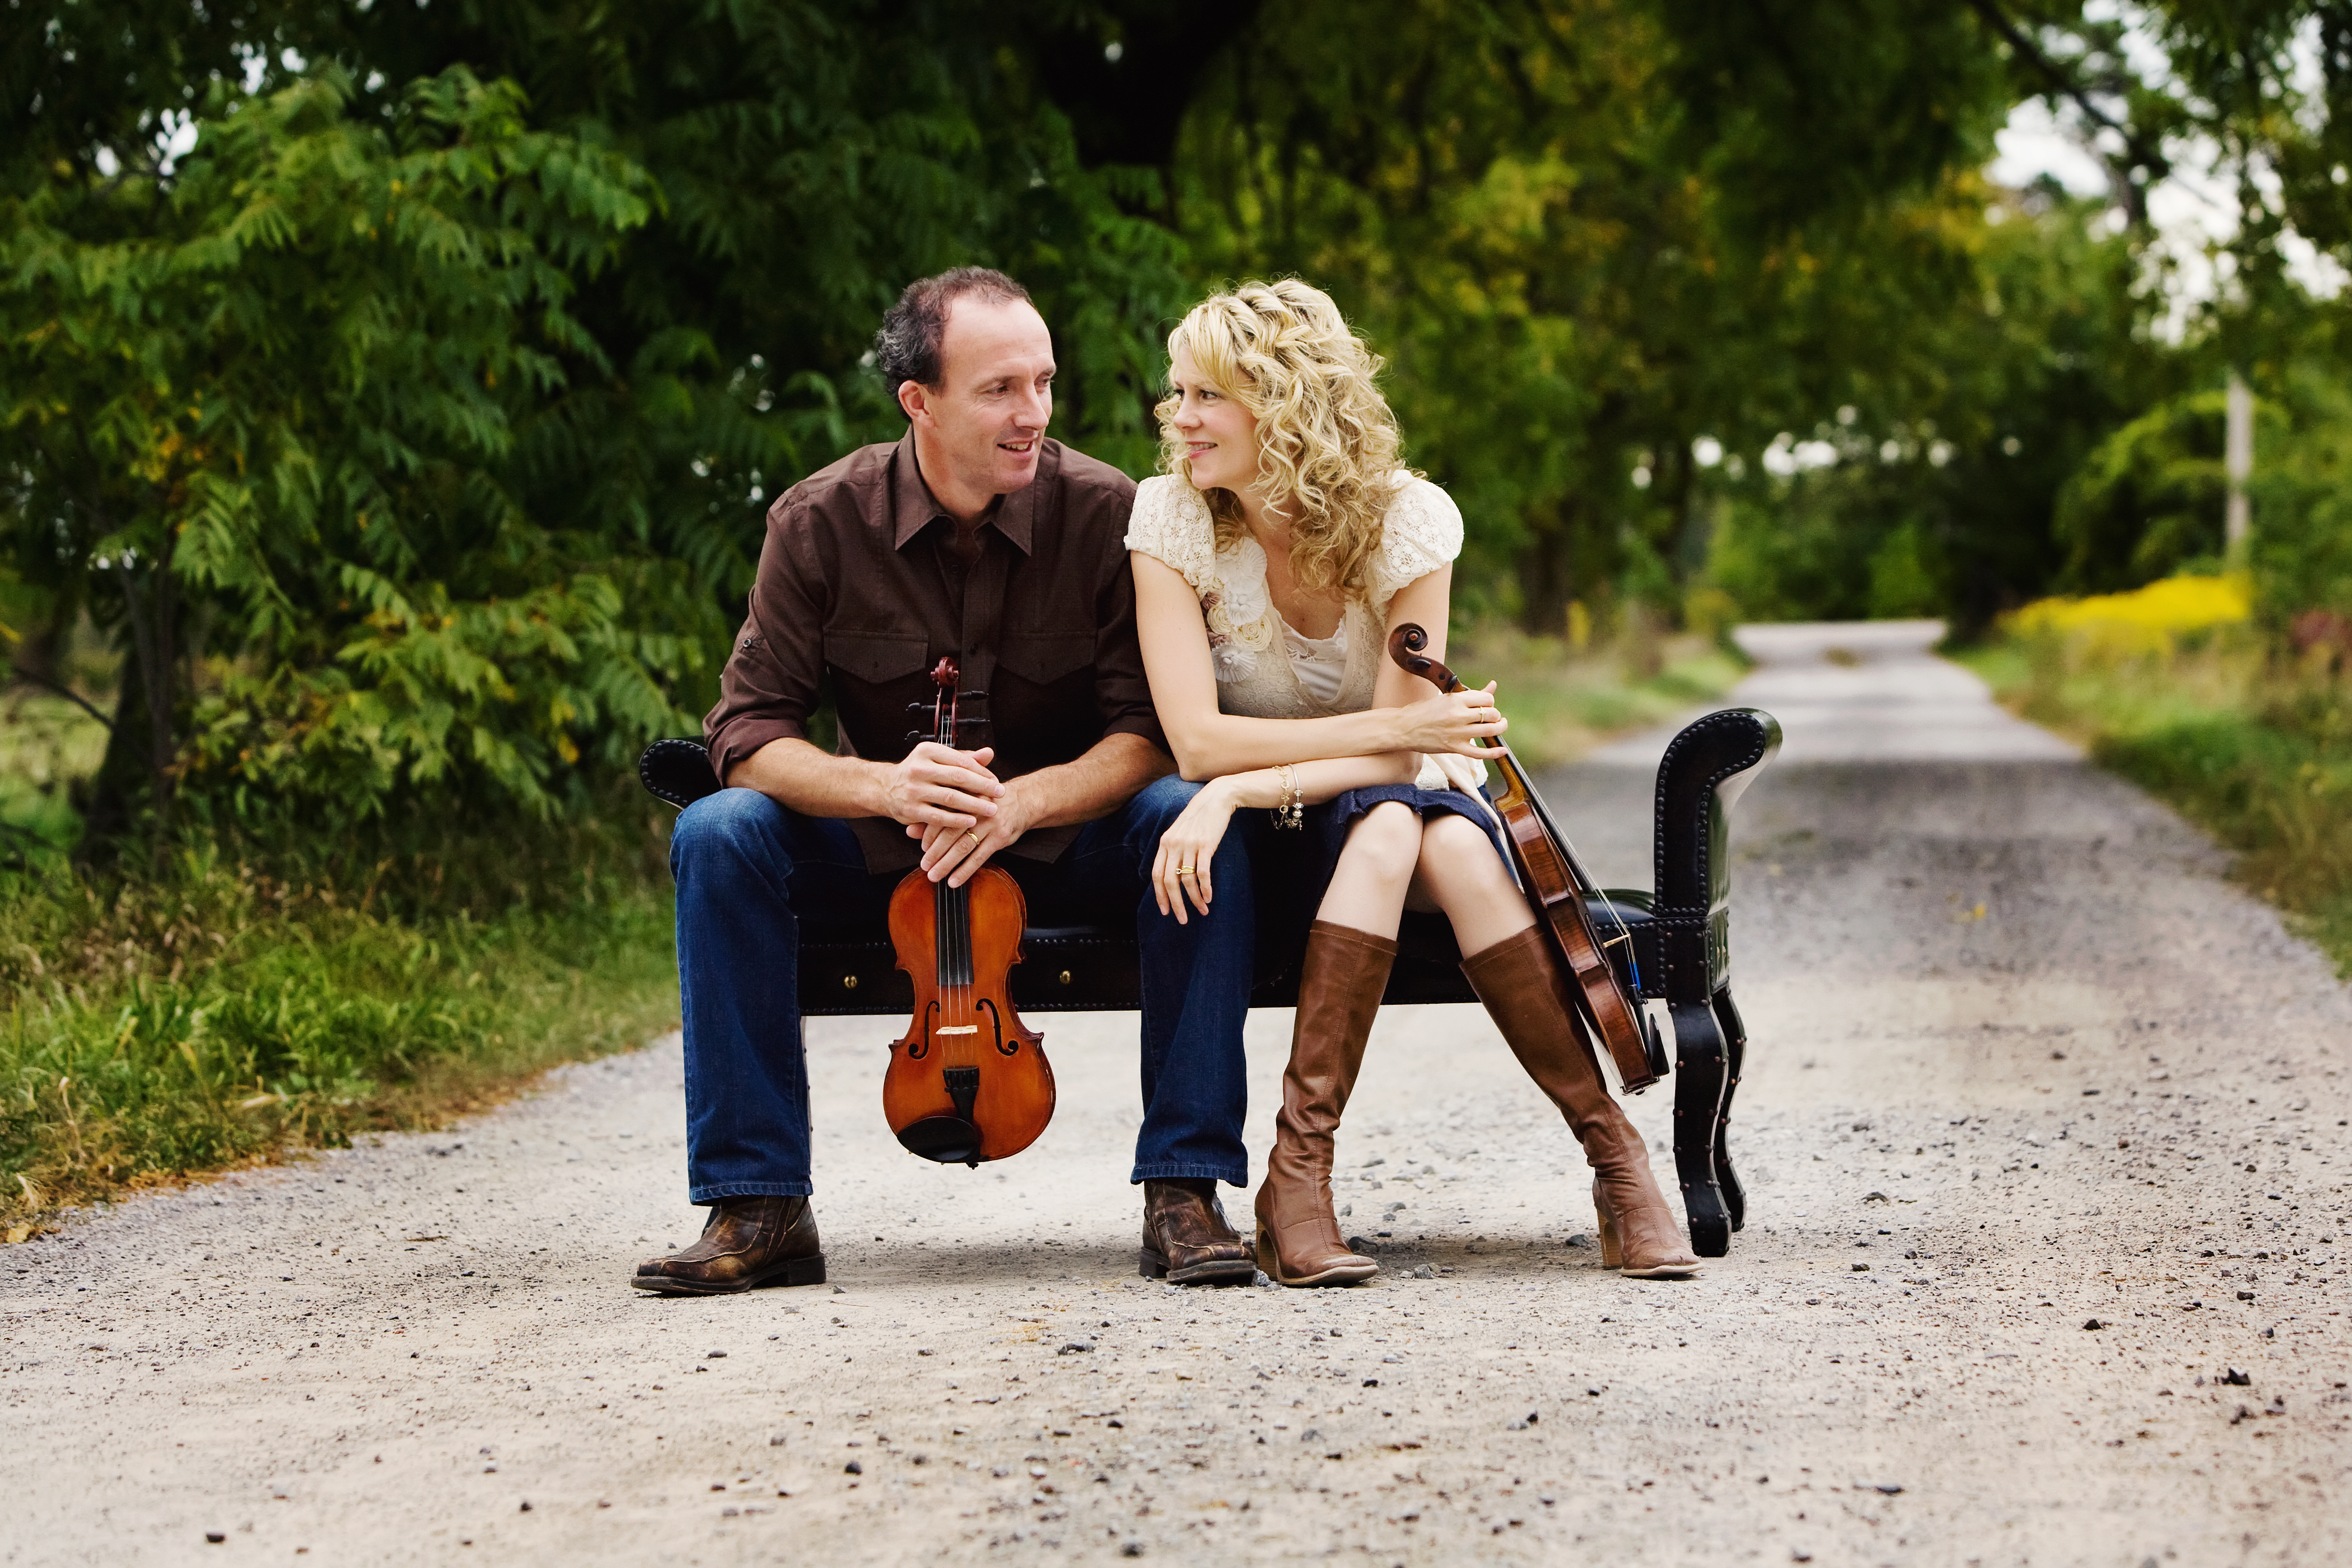 NLFB ARTIST PROFILE: NATALIE MACMASTER & DONNELL LEAHY